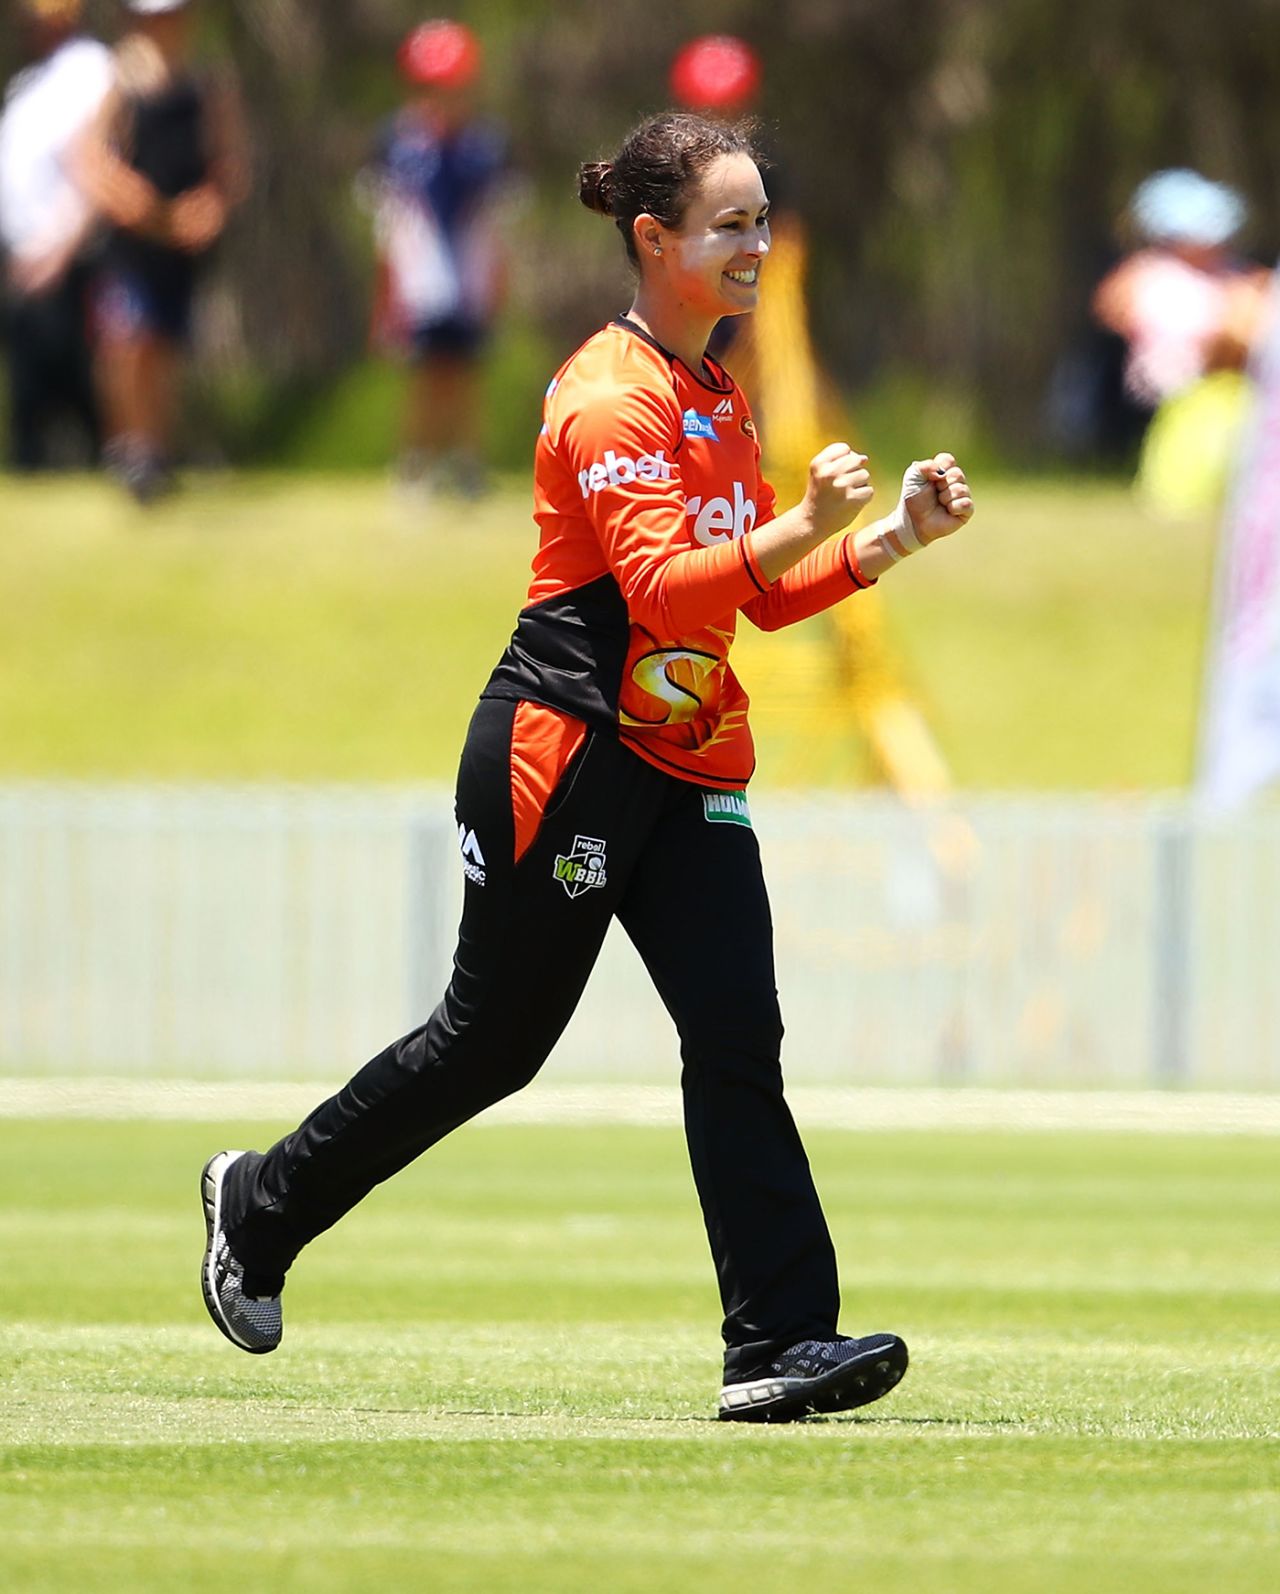 Emma King took the key wickets of Ellyse Perry and Ashleigh Gardner, Sydney Sixers v Perth Scorchers, Women's Big Bash League 2017-18, Wollongong, December 12, 2017